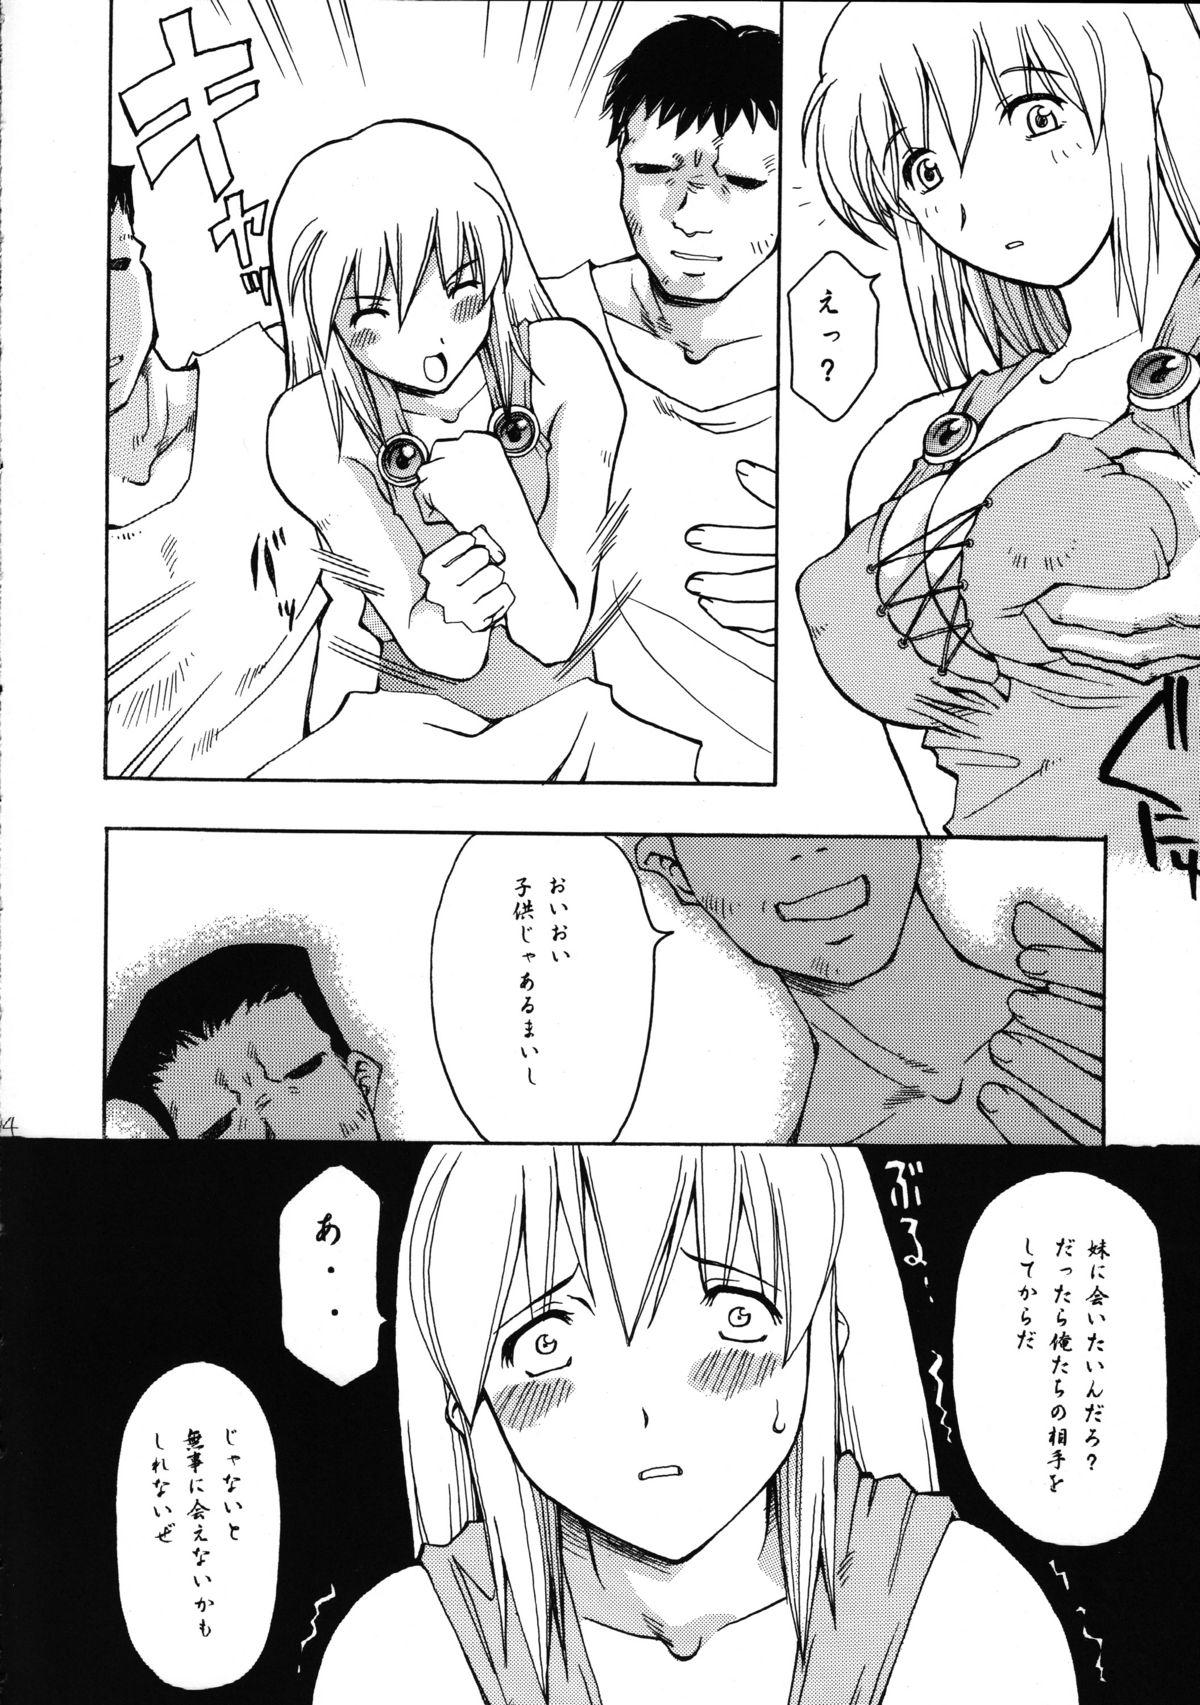 Sucking Dick EXUP 9 - Soulcalibur Adult - Page 8